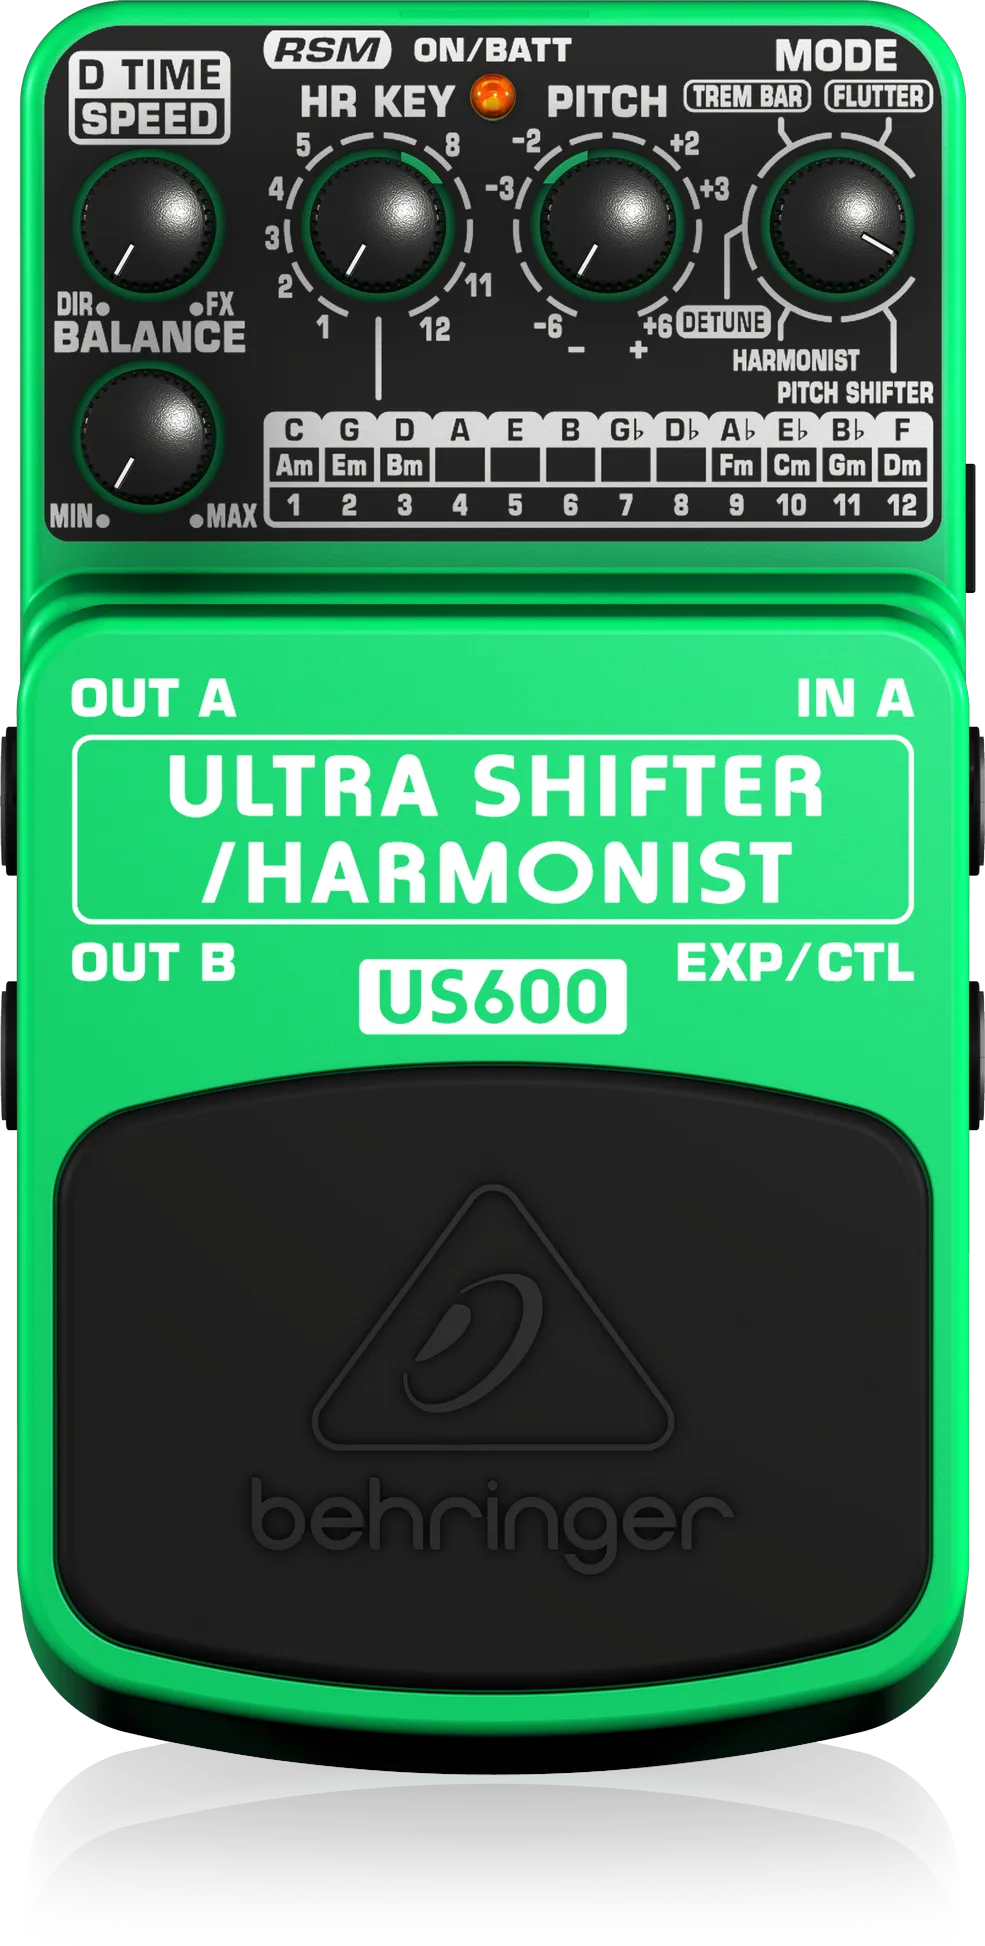 US600 Ultra Shifter/Harmonist Guitar Pedal By Behringer